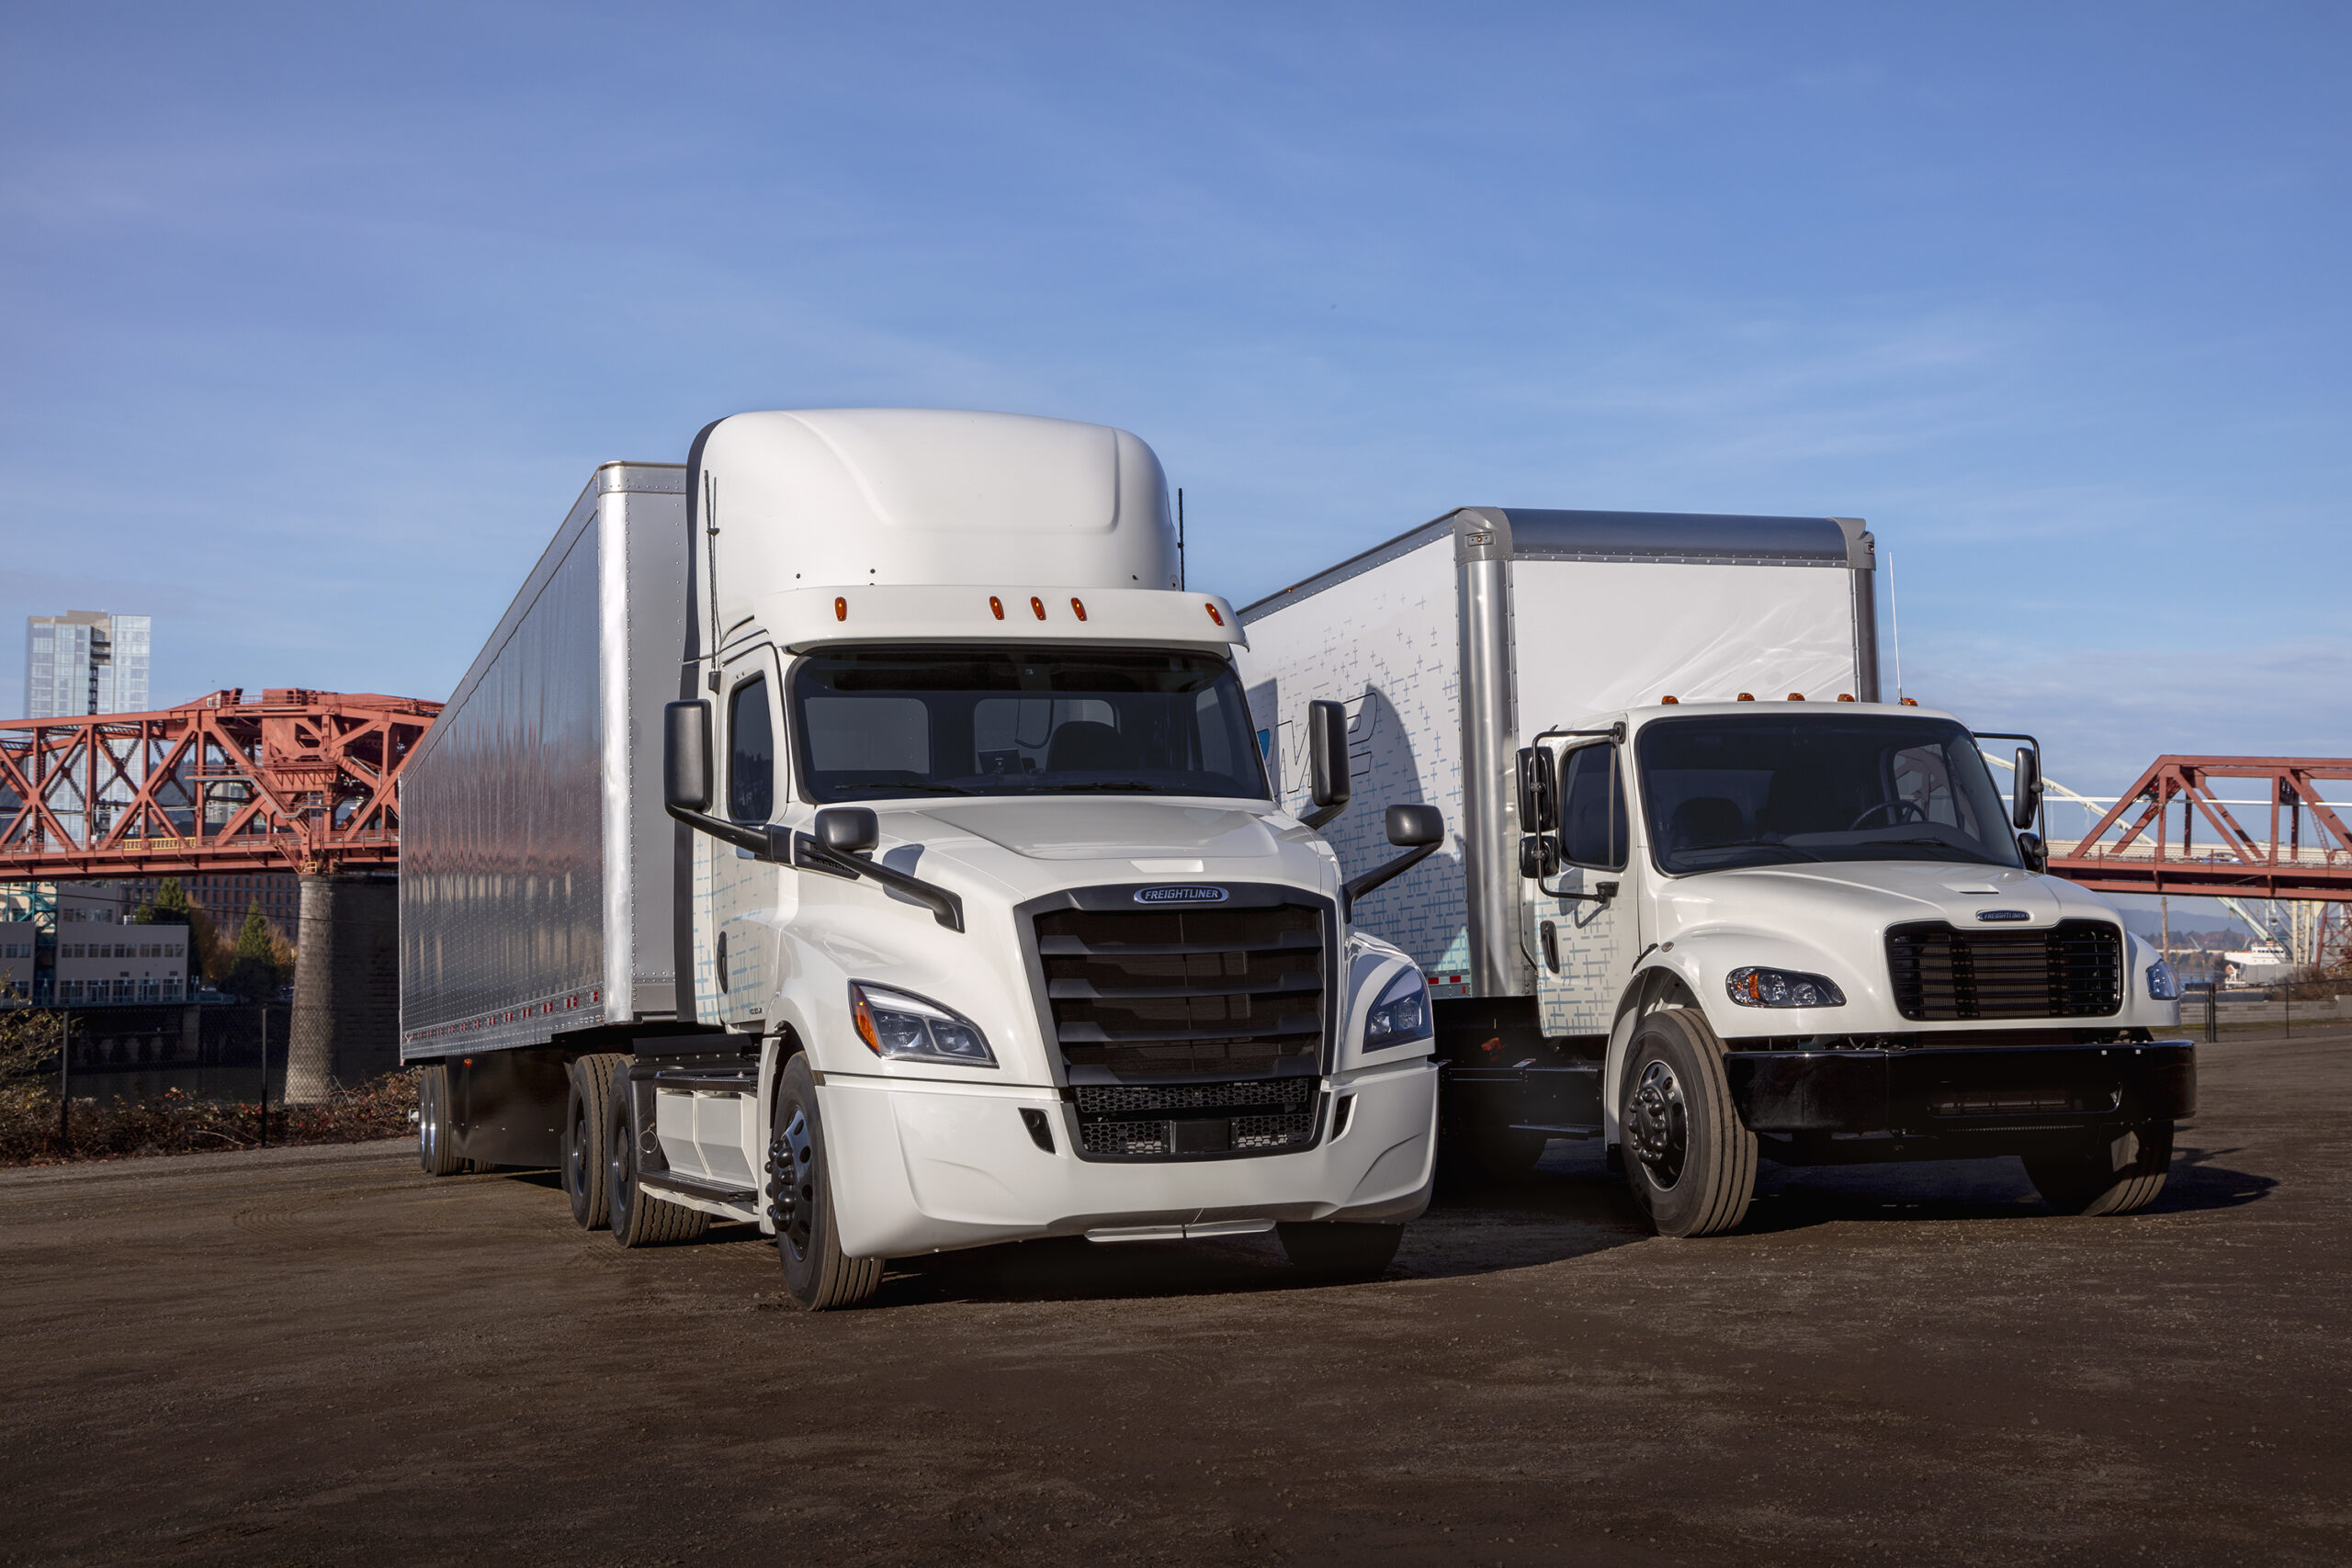 Why Freightliner Tampa?